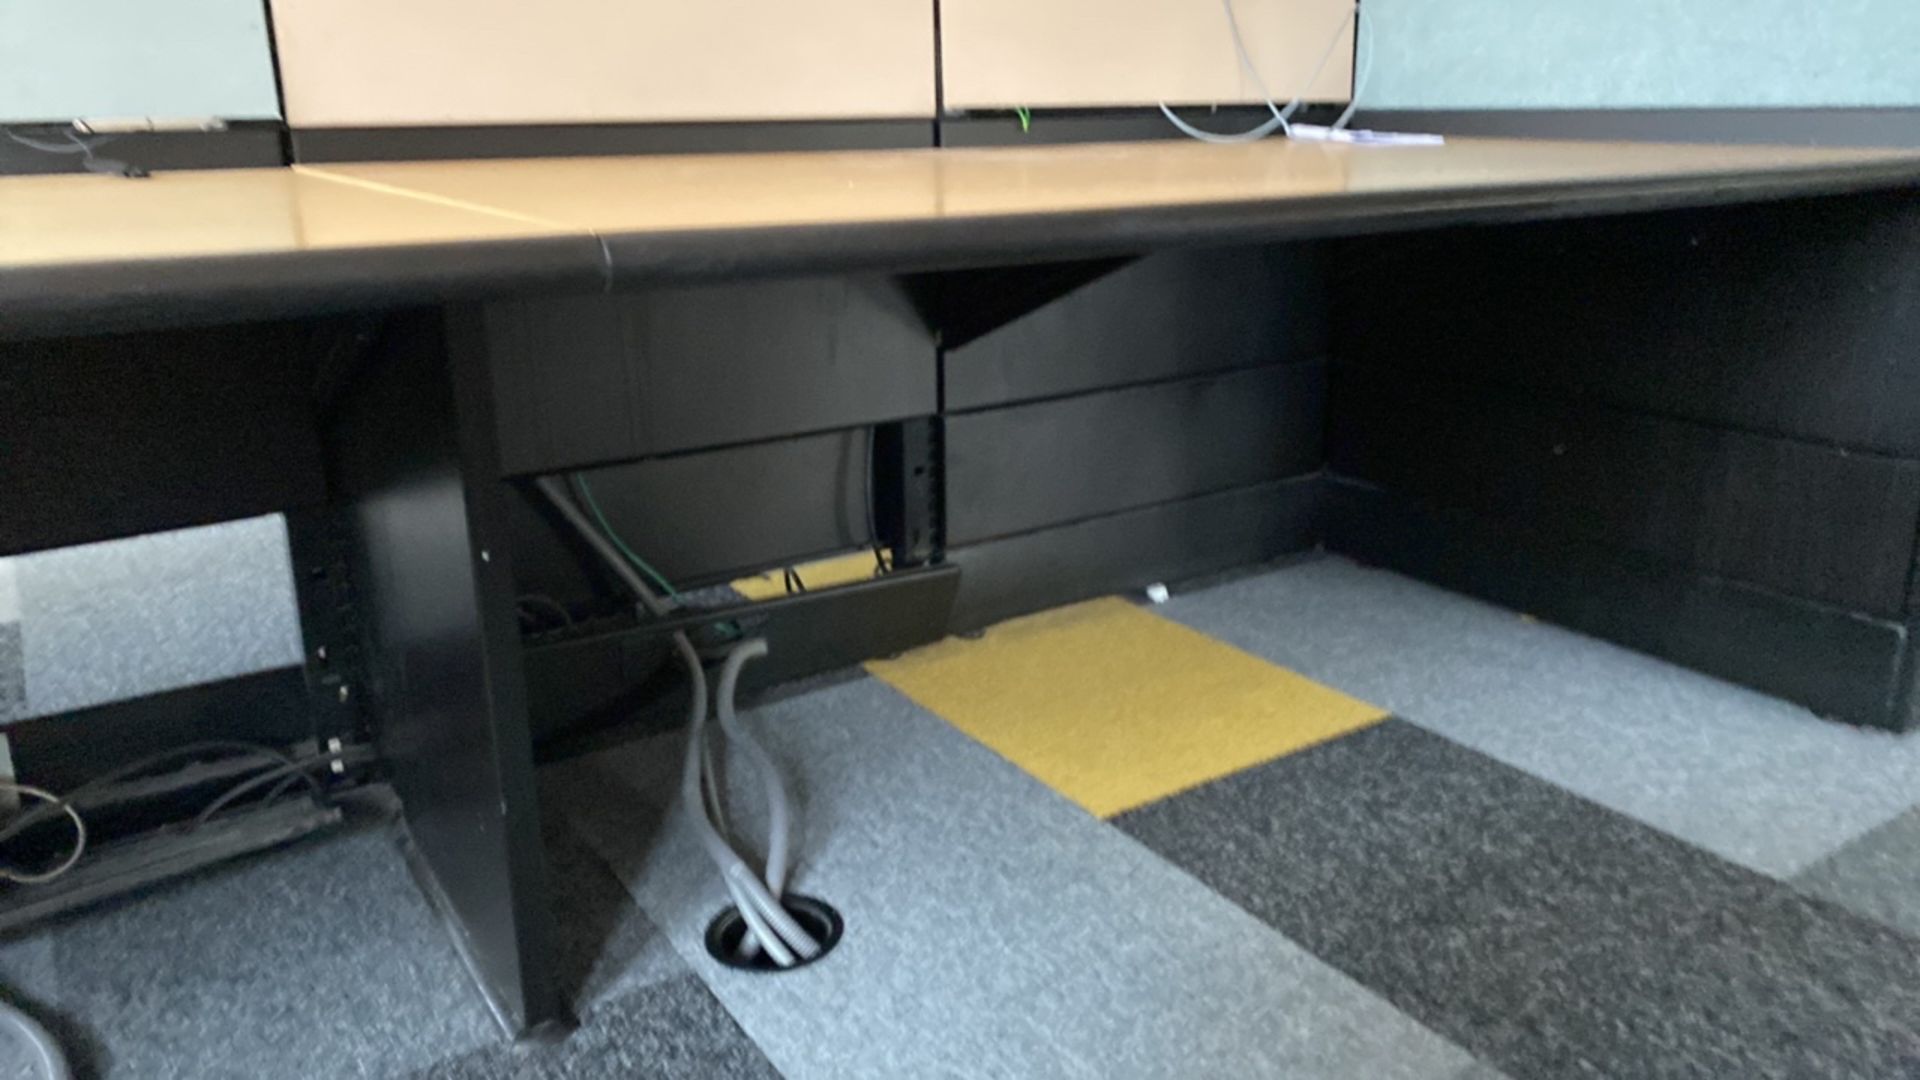 Bank Of 2 Wooden Desks With Black Legs - Image 5 of 5